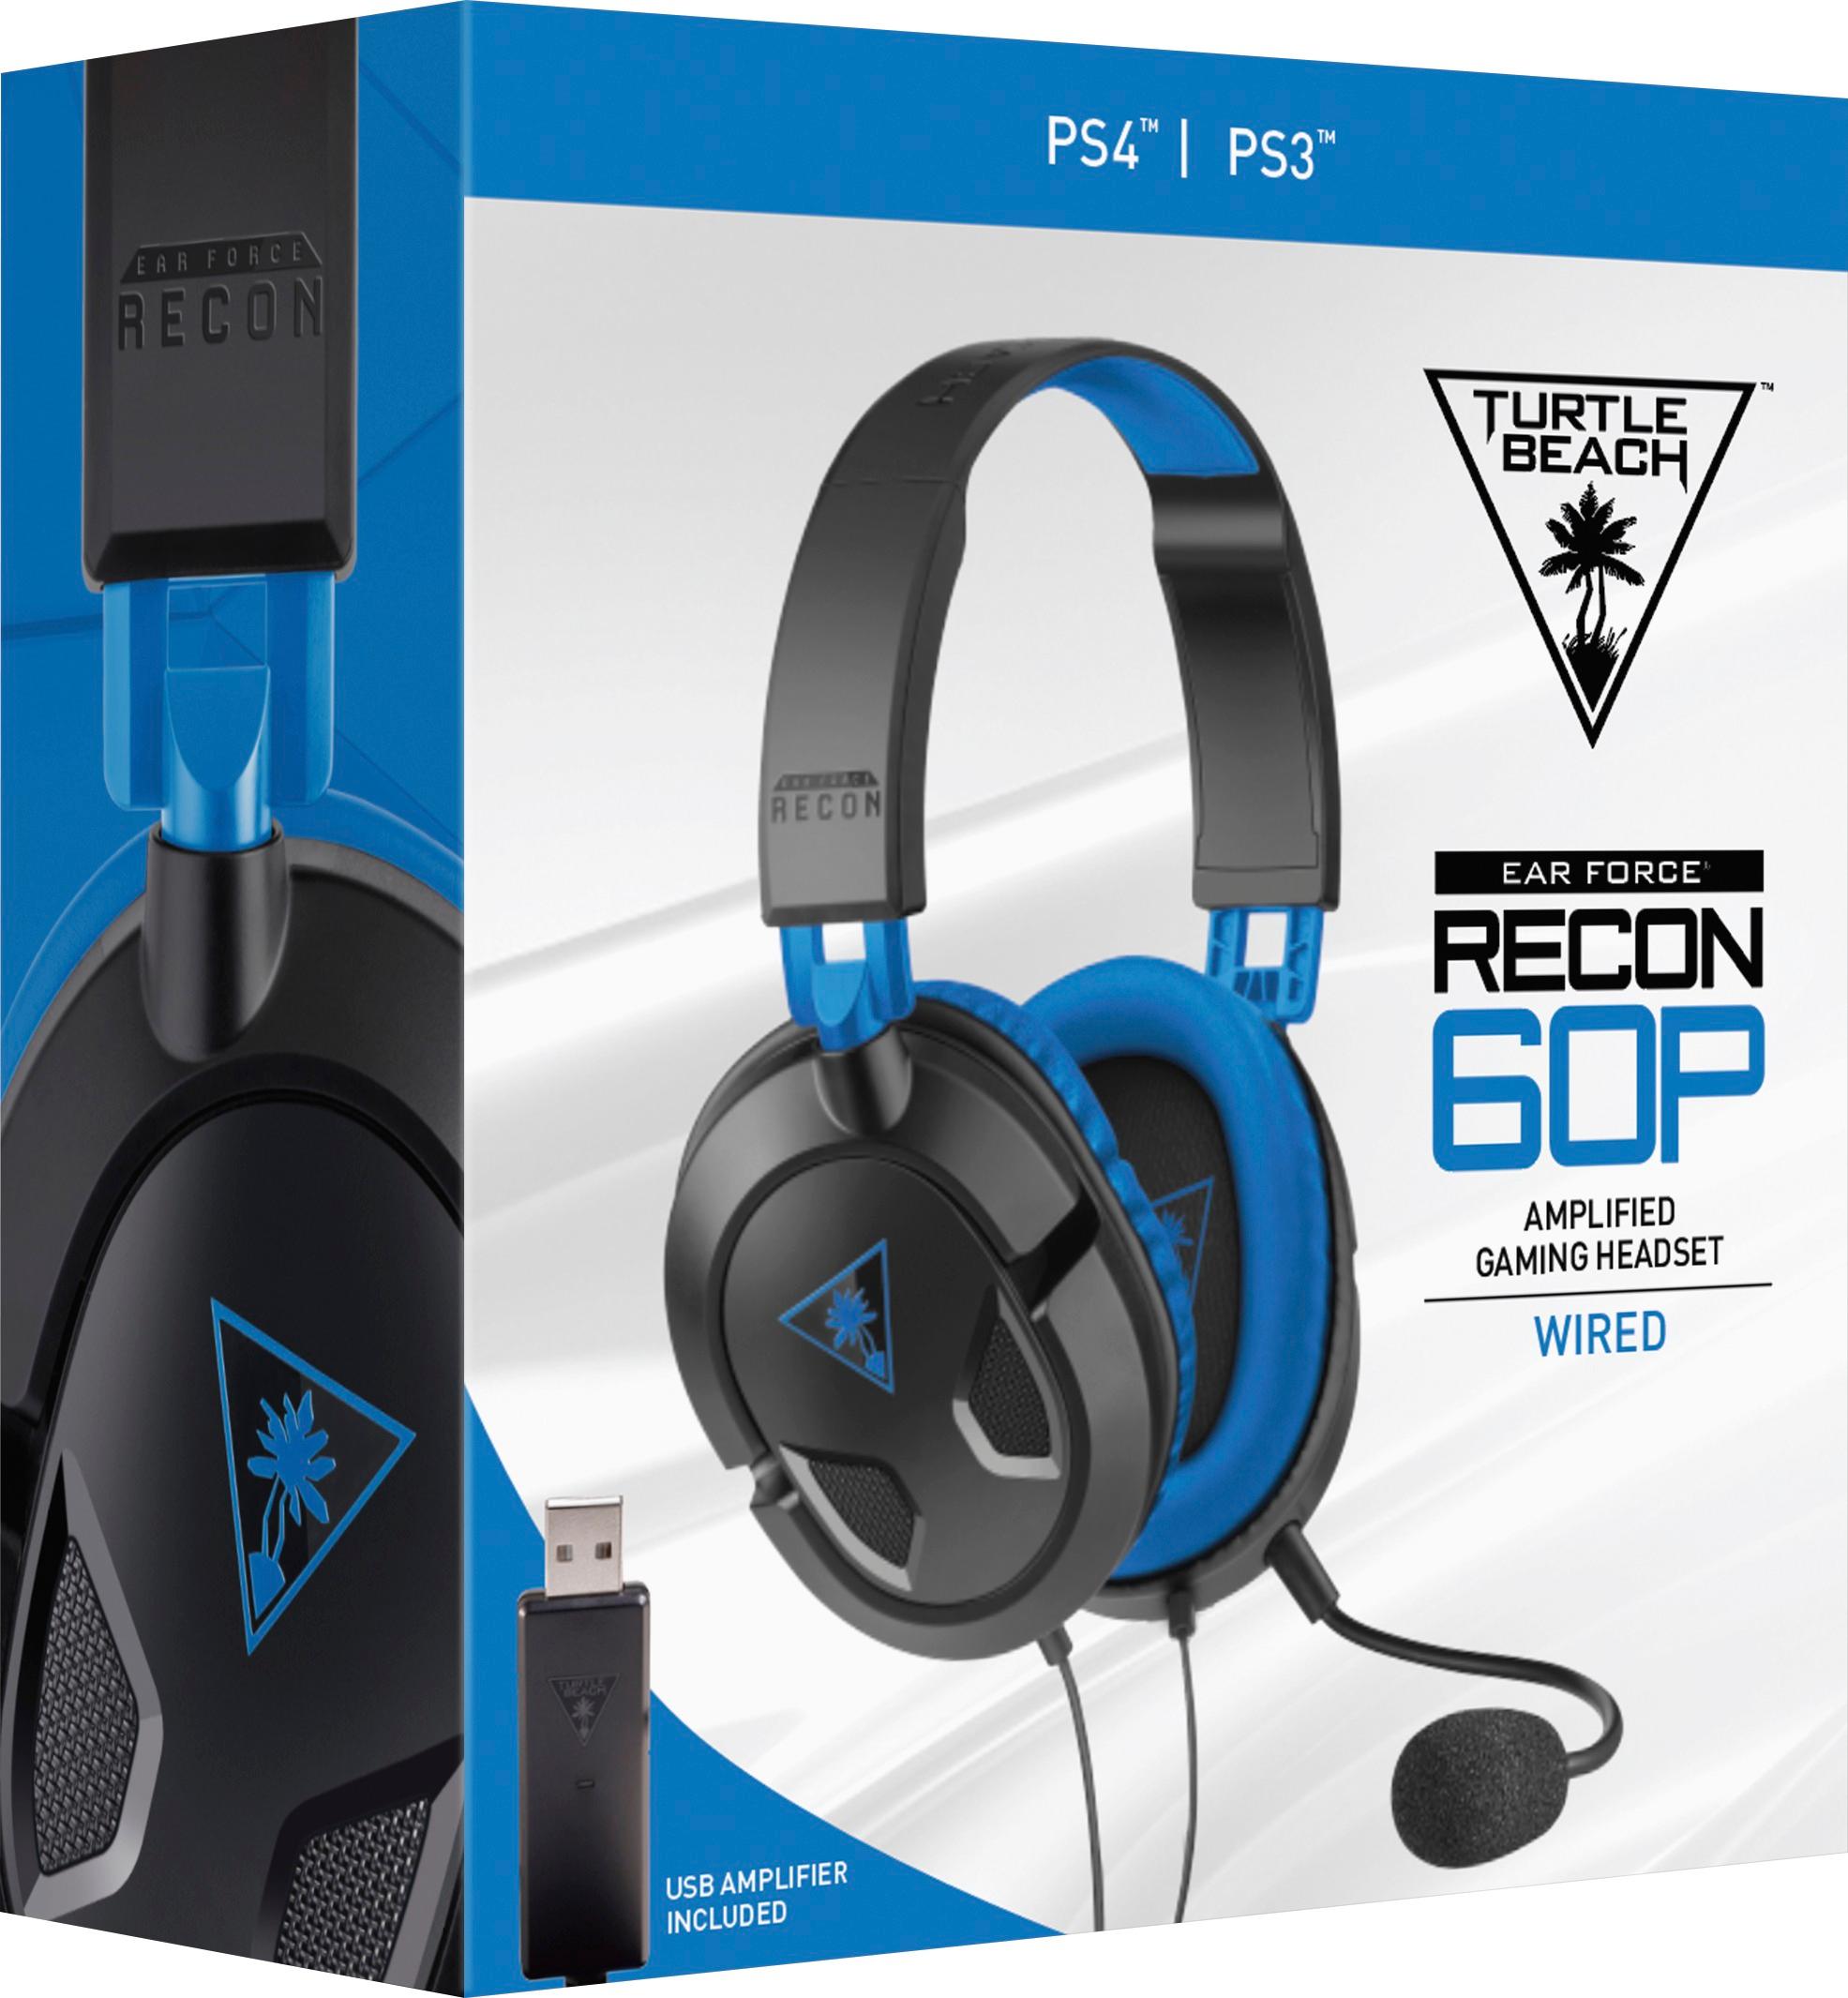 ps4 headset with amplifier